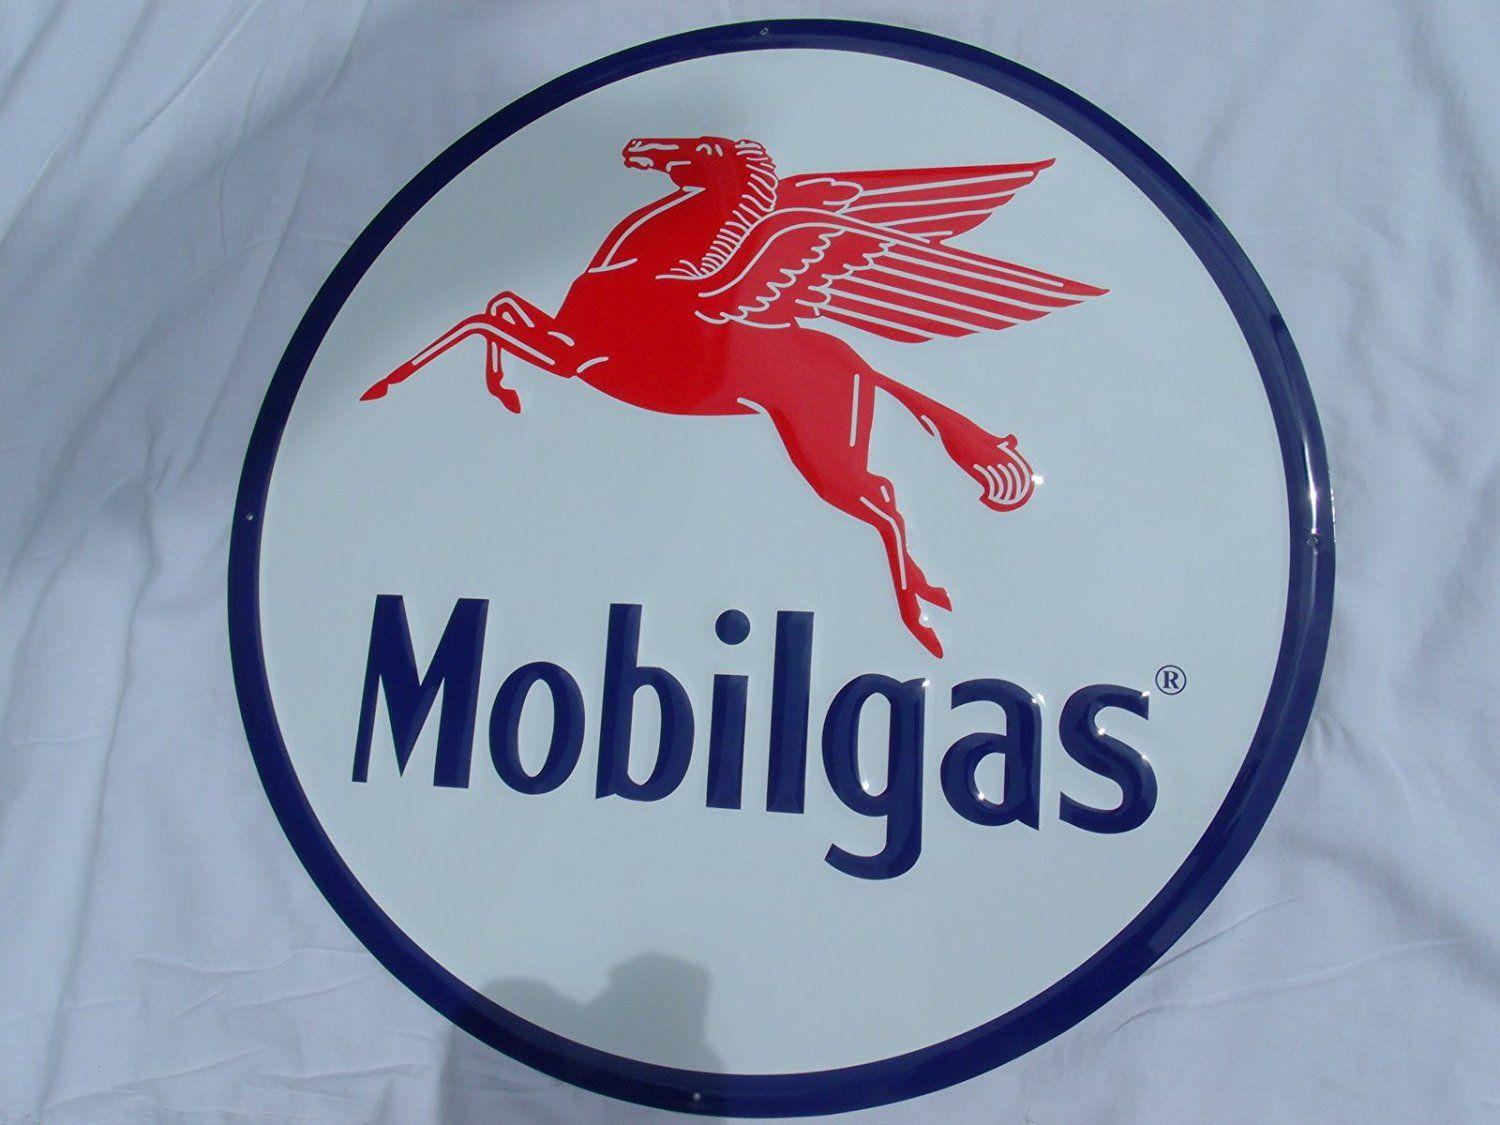 Mobil Gas Station Logo - Cheap Mobil Gas Logo, find Mobil Gas Logo deals on line at Alibaba.com